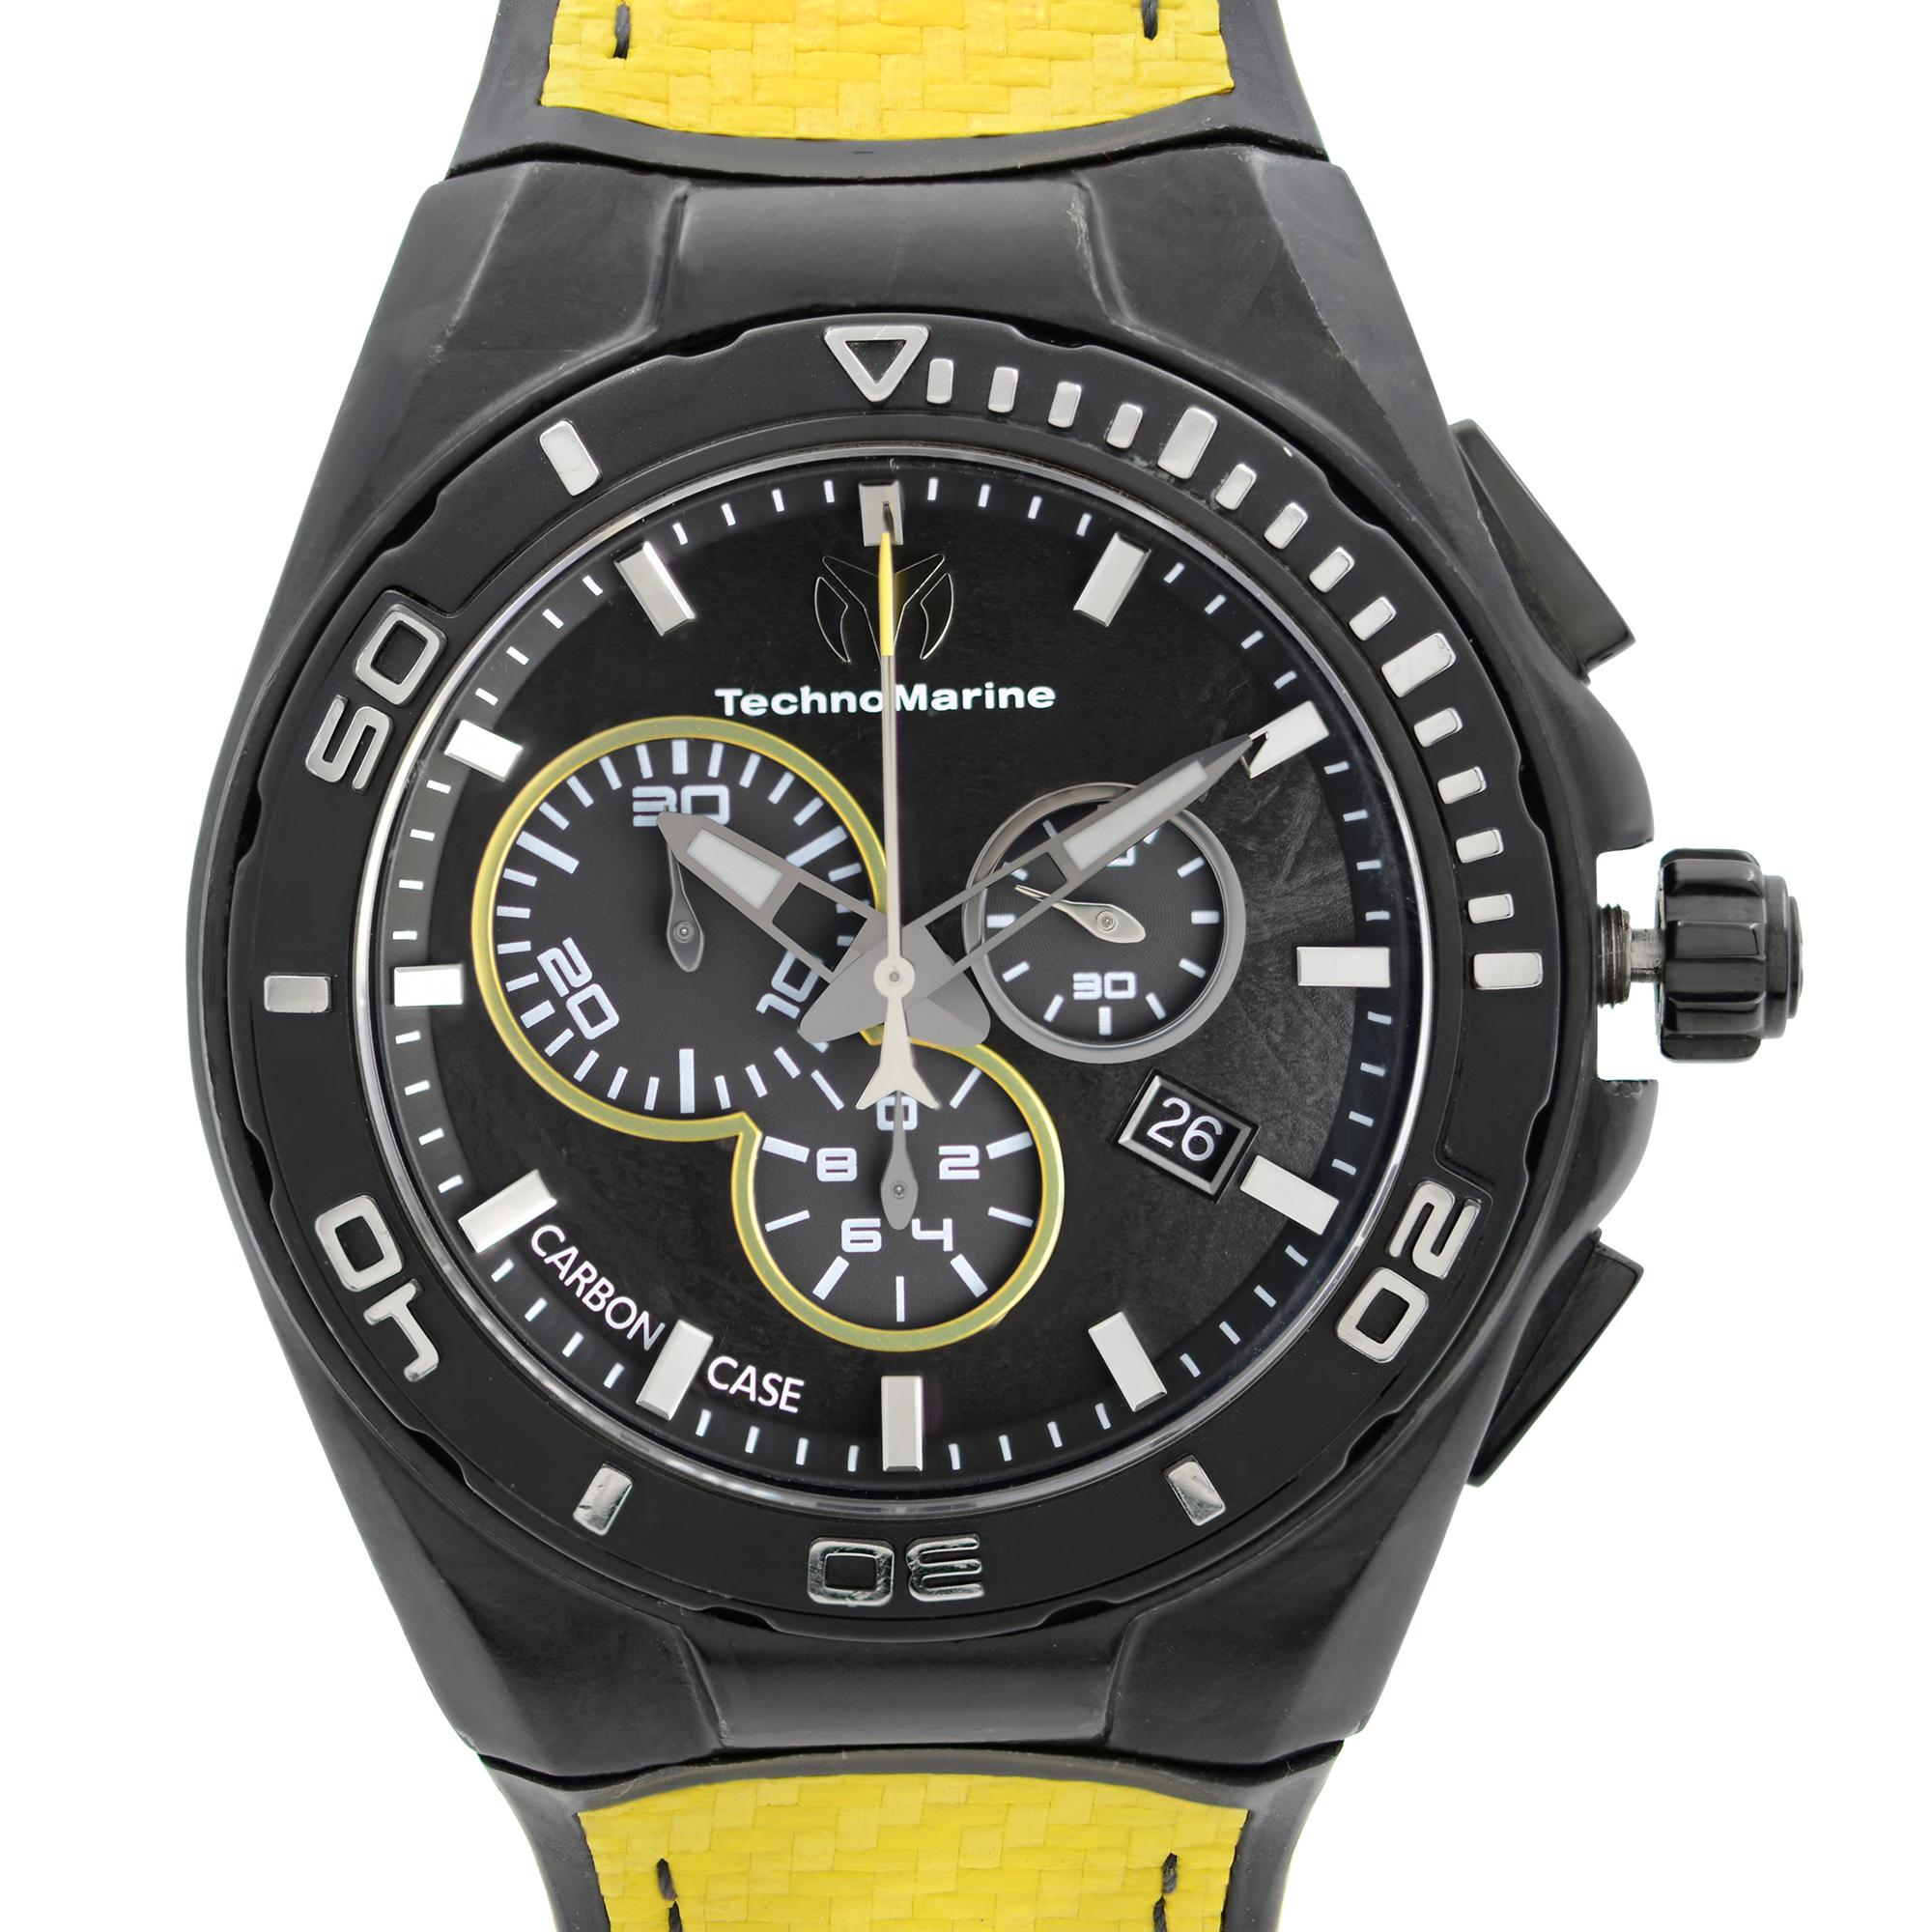 Pre-Owned Condition. Has Minor Dents on the Case and Signs of Wear on Yellow Parts of the Rubber Band. This Timepiece is powered by a Quartz Movement and Features: Carbon Fiber Case and Two-Piece Silicone Strap. Uni-directional Rotating Bezel. Black